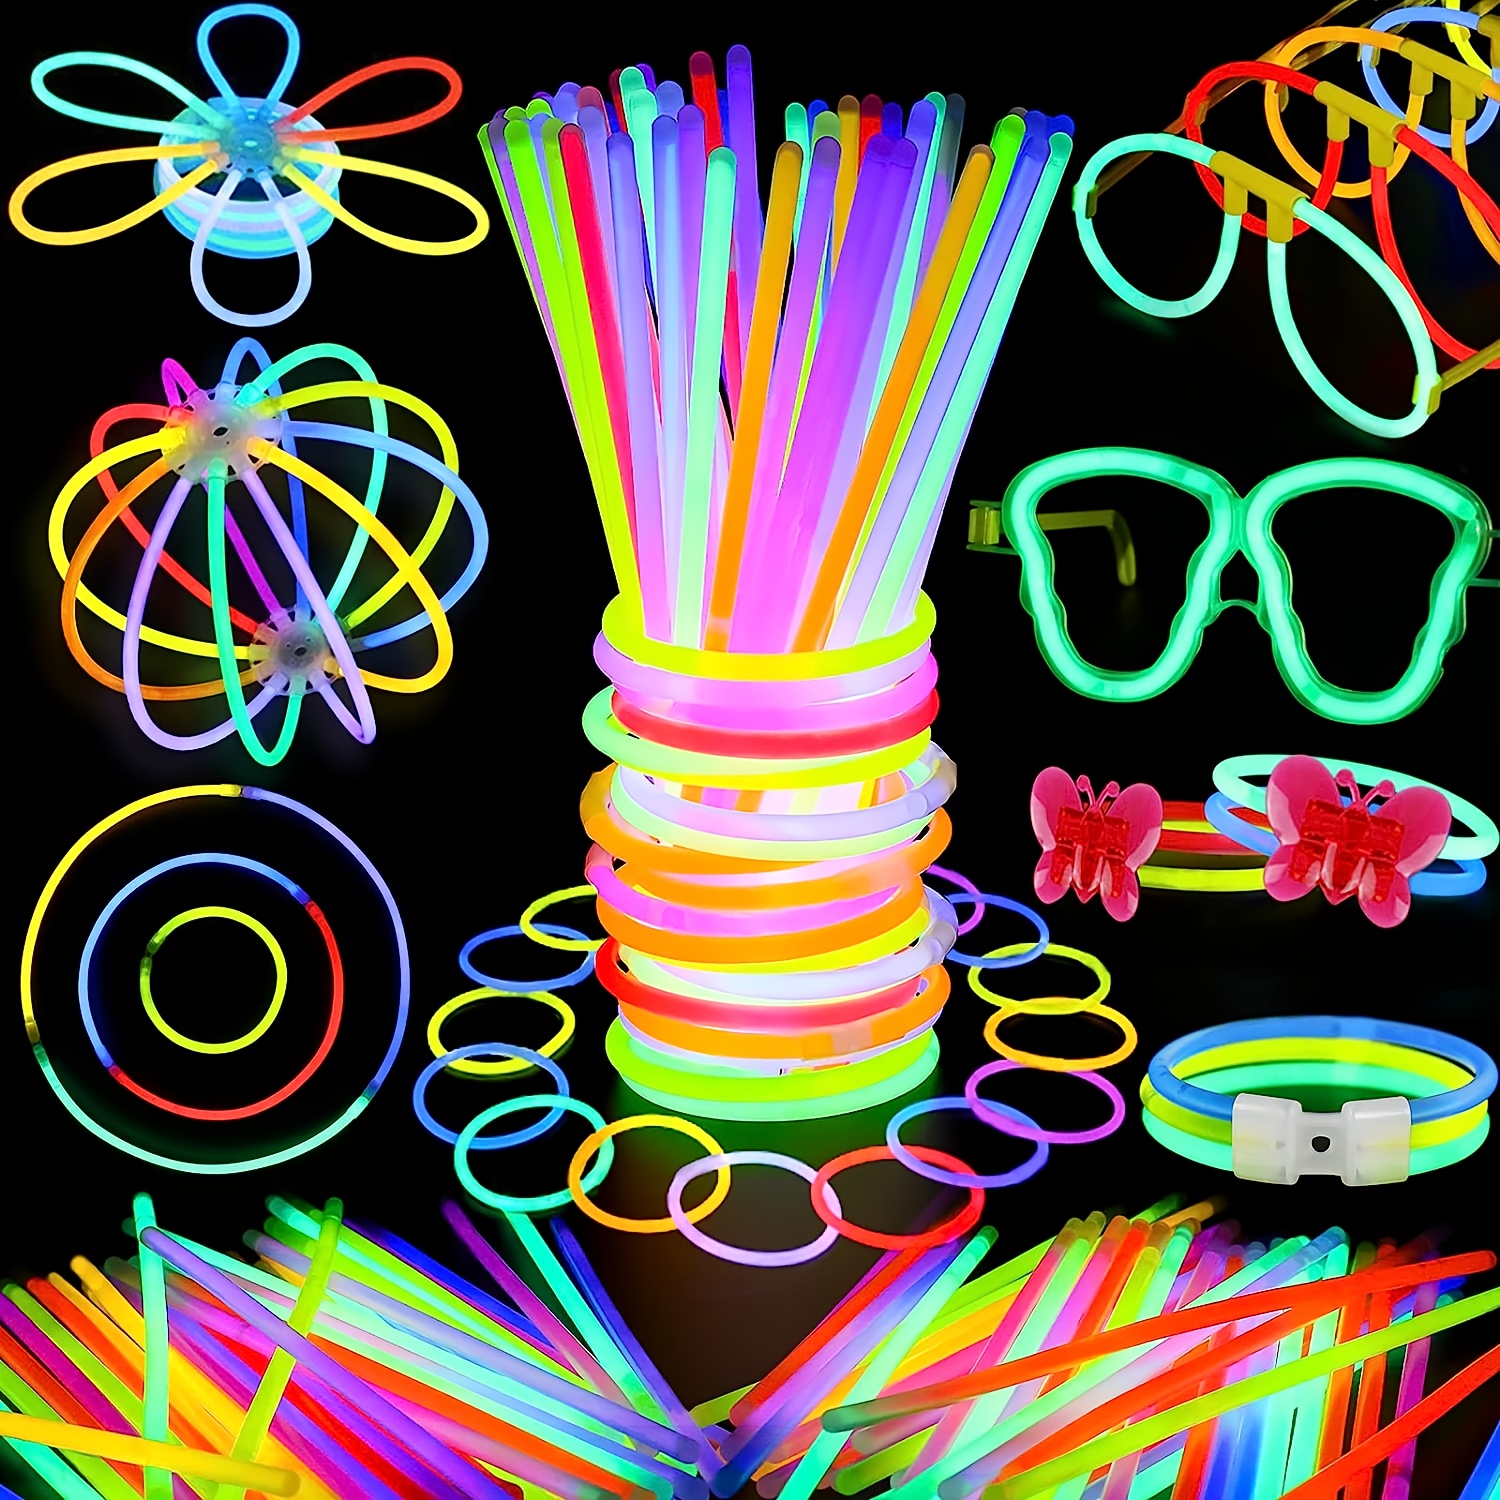 

50pcs Glow Sticks Glow Party Favors For Kids/adults, Glowsticks Party Packs 7 Colors & Connectors For Glow Necklace, Flower Balls, Luminous Glasses And Triple/butterfly Bracelets